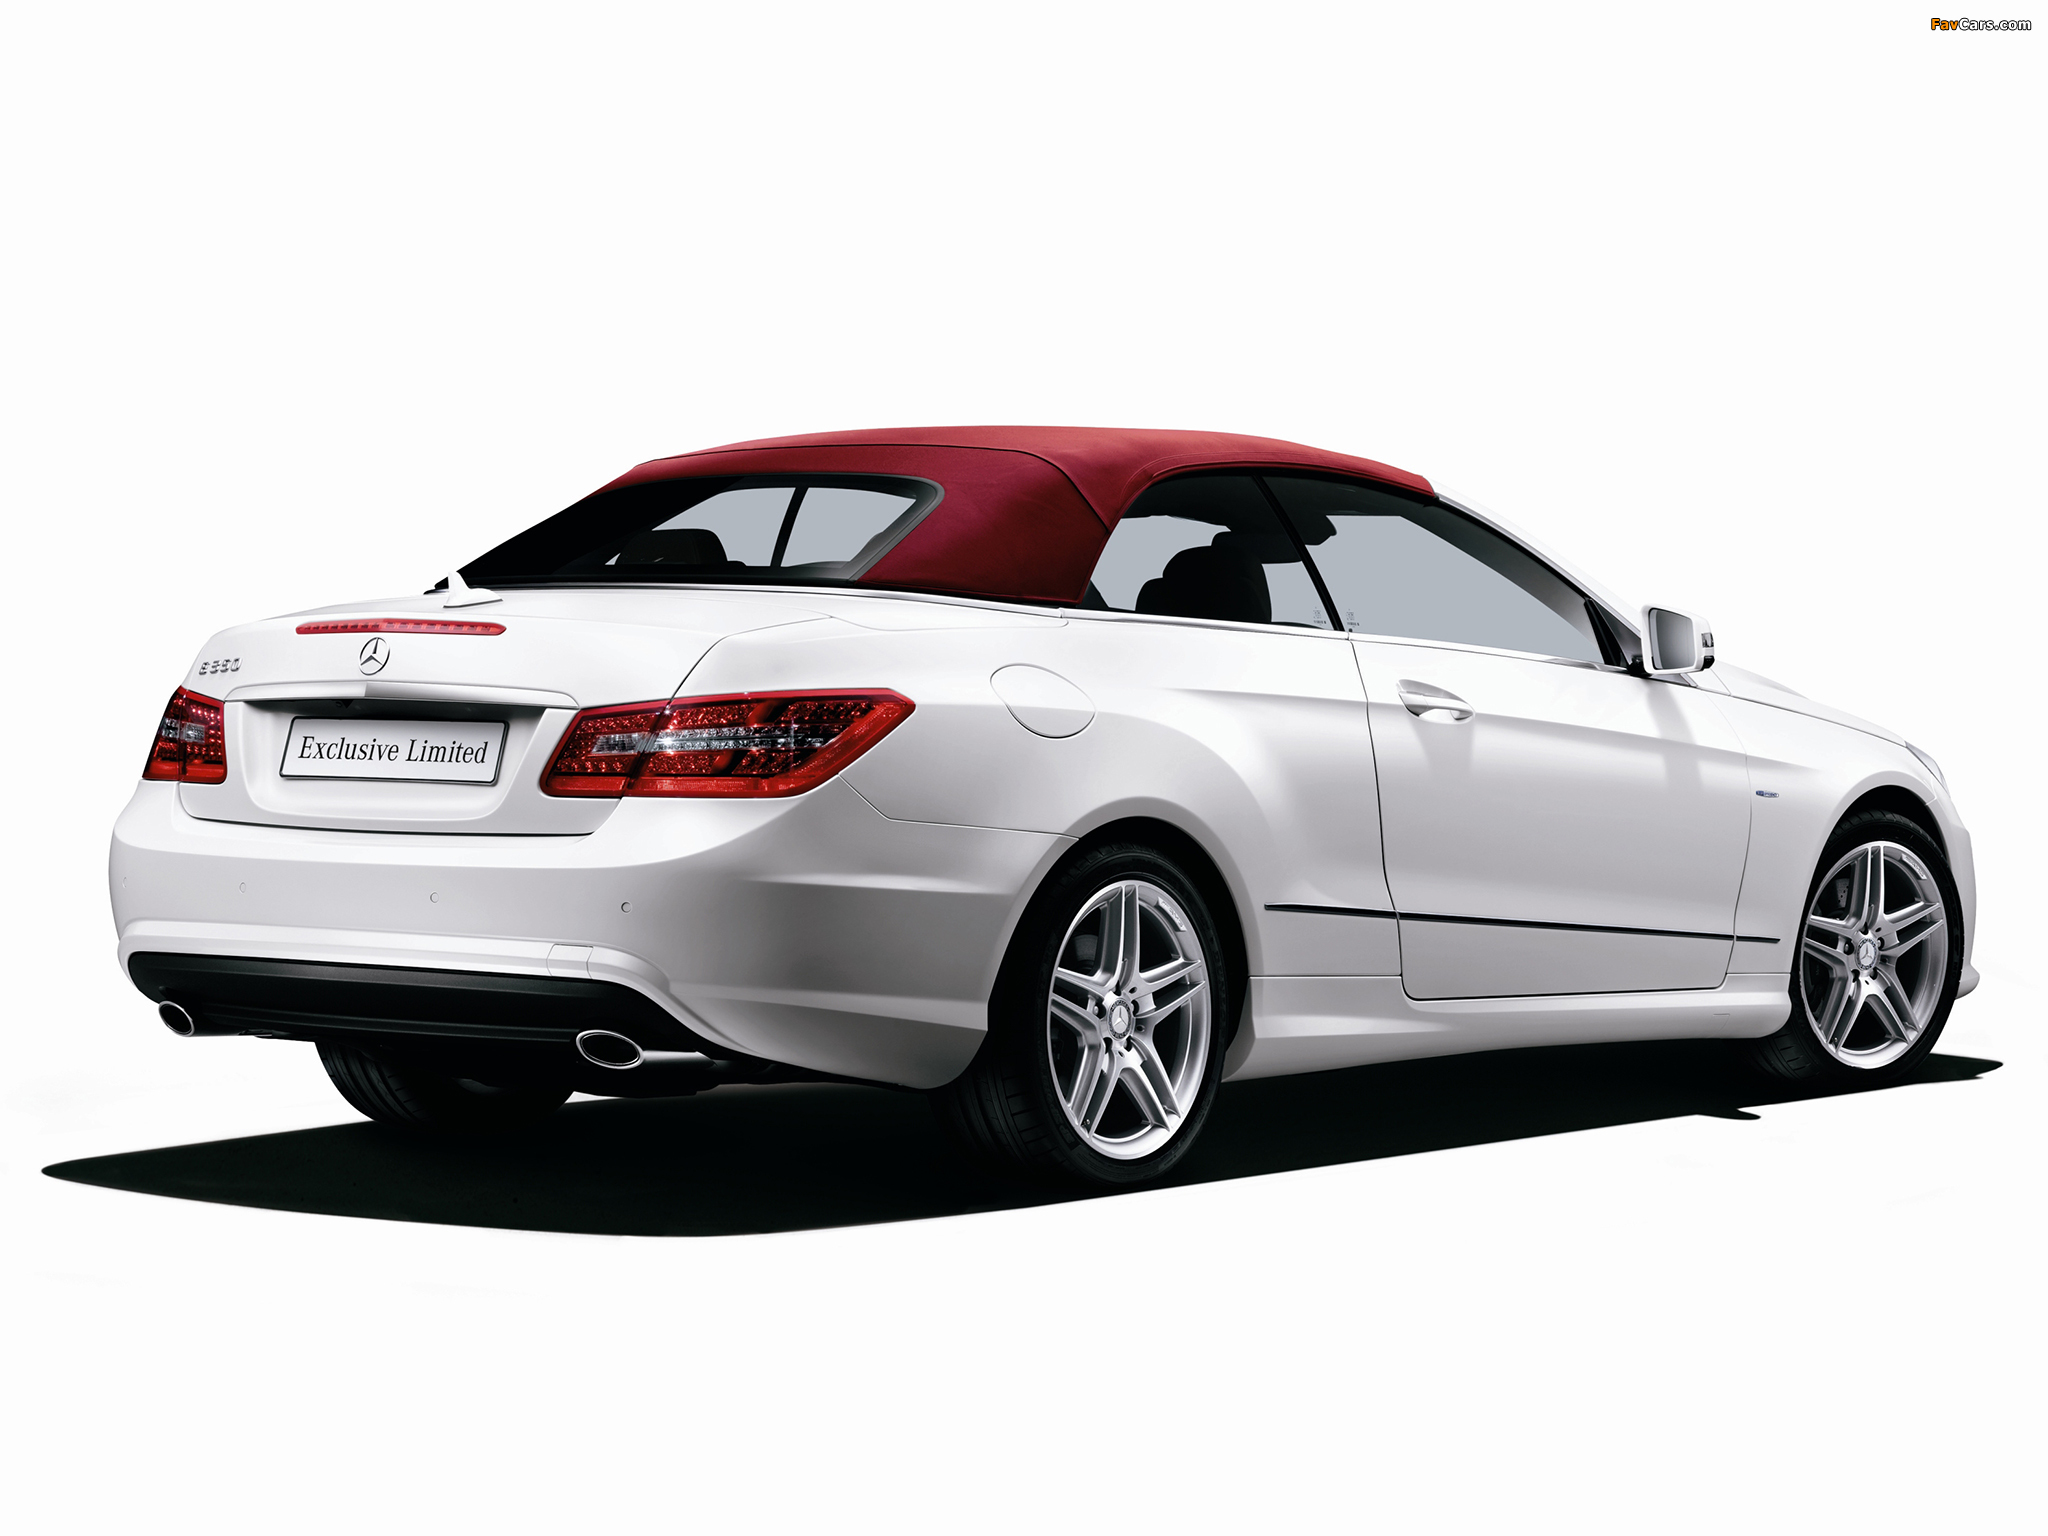 Mercedes-Benz E 350 BlueEfficiency Cabrio Exclusive Limited (A207) 2012 wallpapers (2048 x 1536)